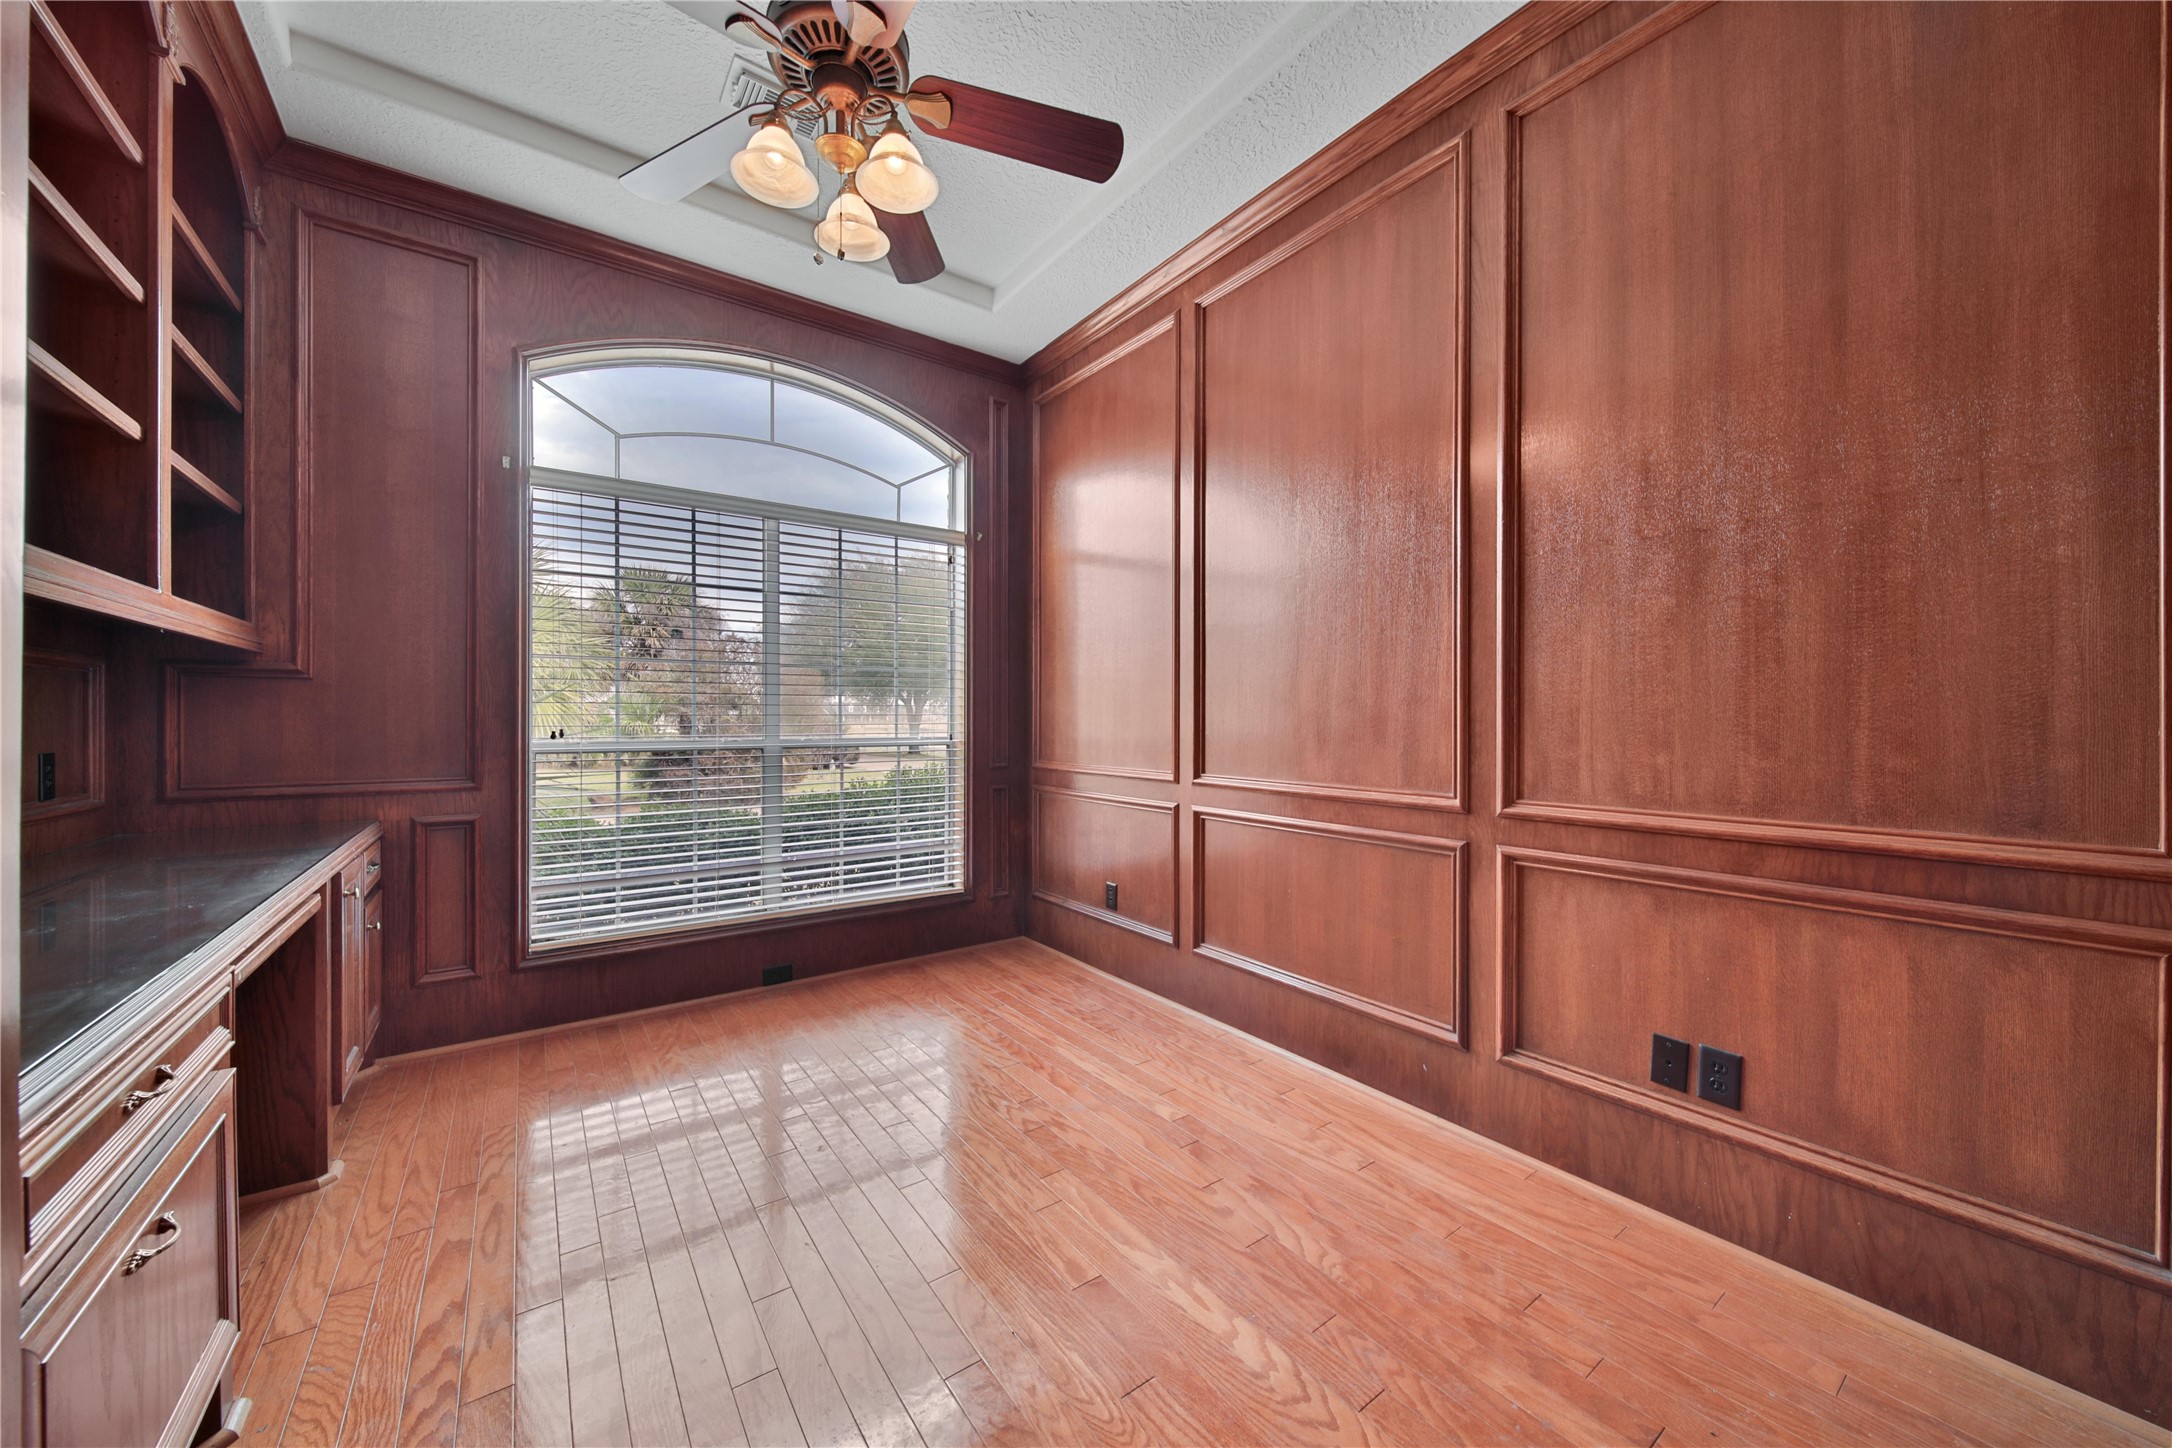 Study with double french glass doors, built in desk and wood paneling.